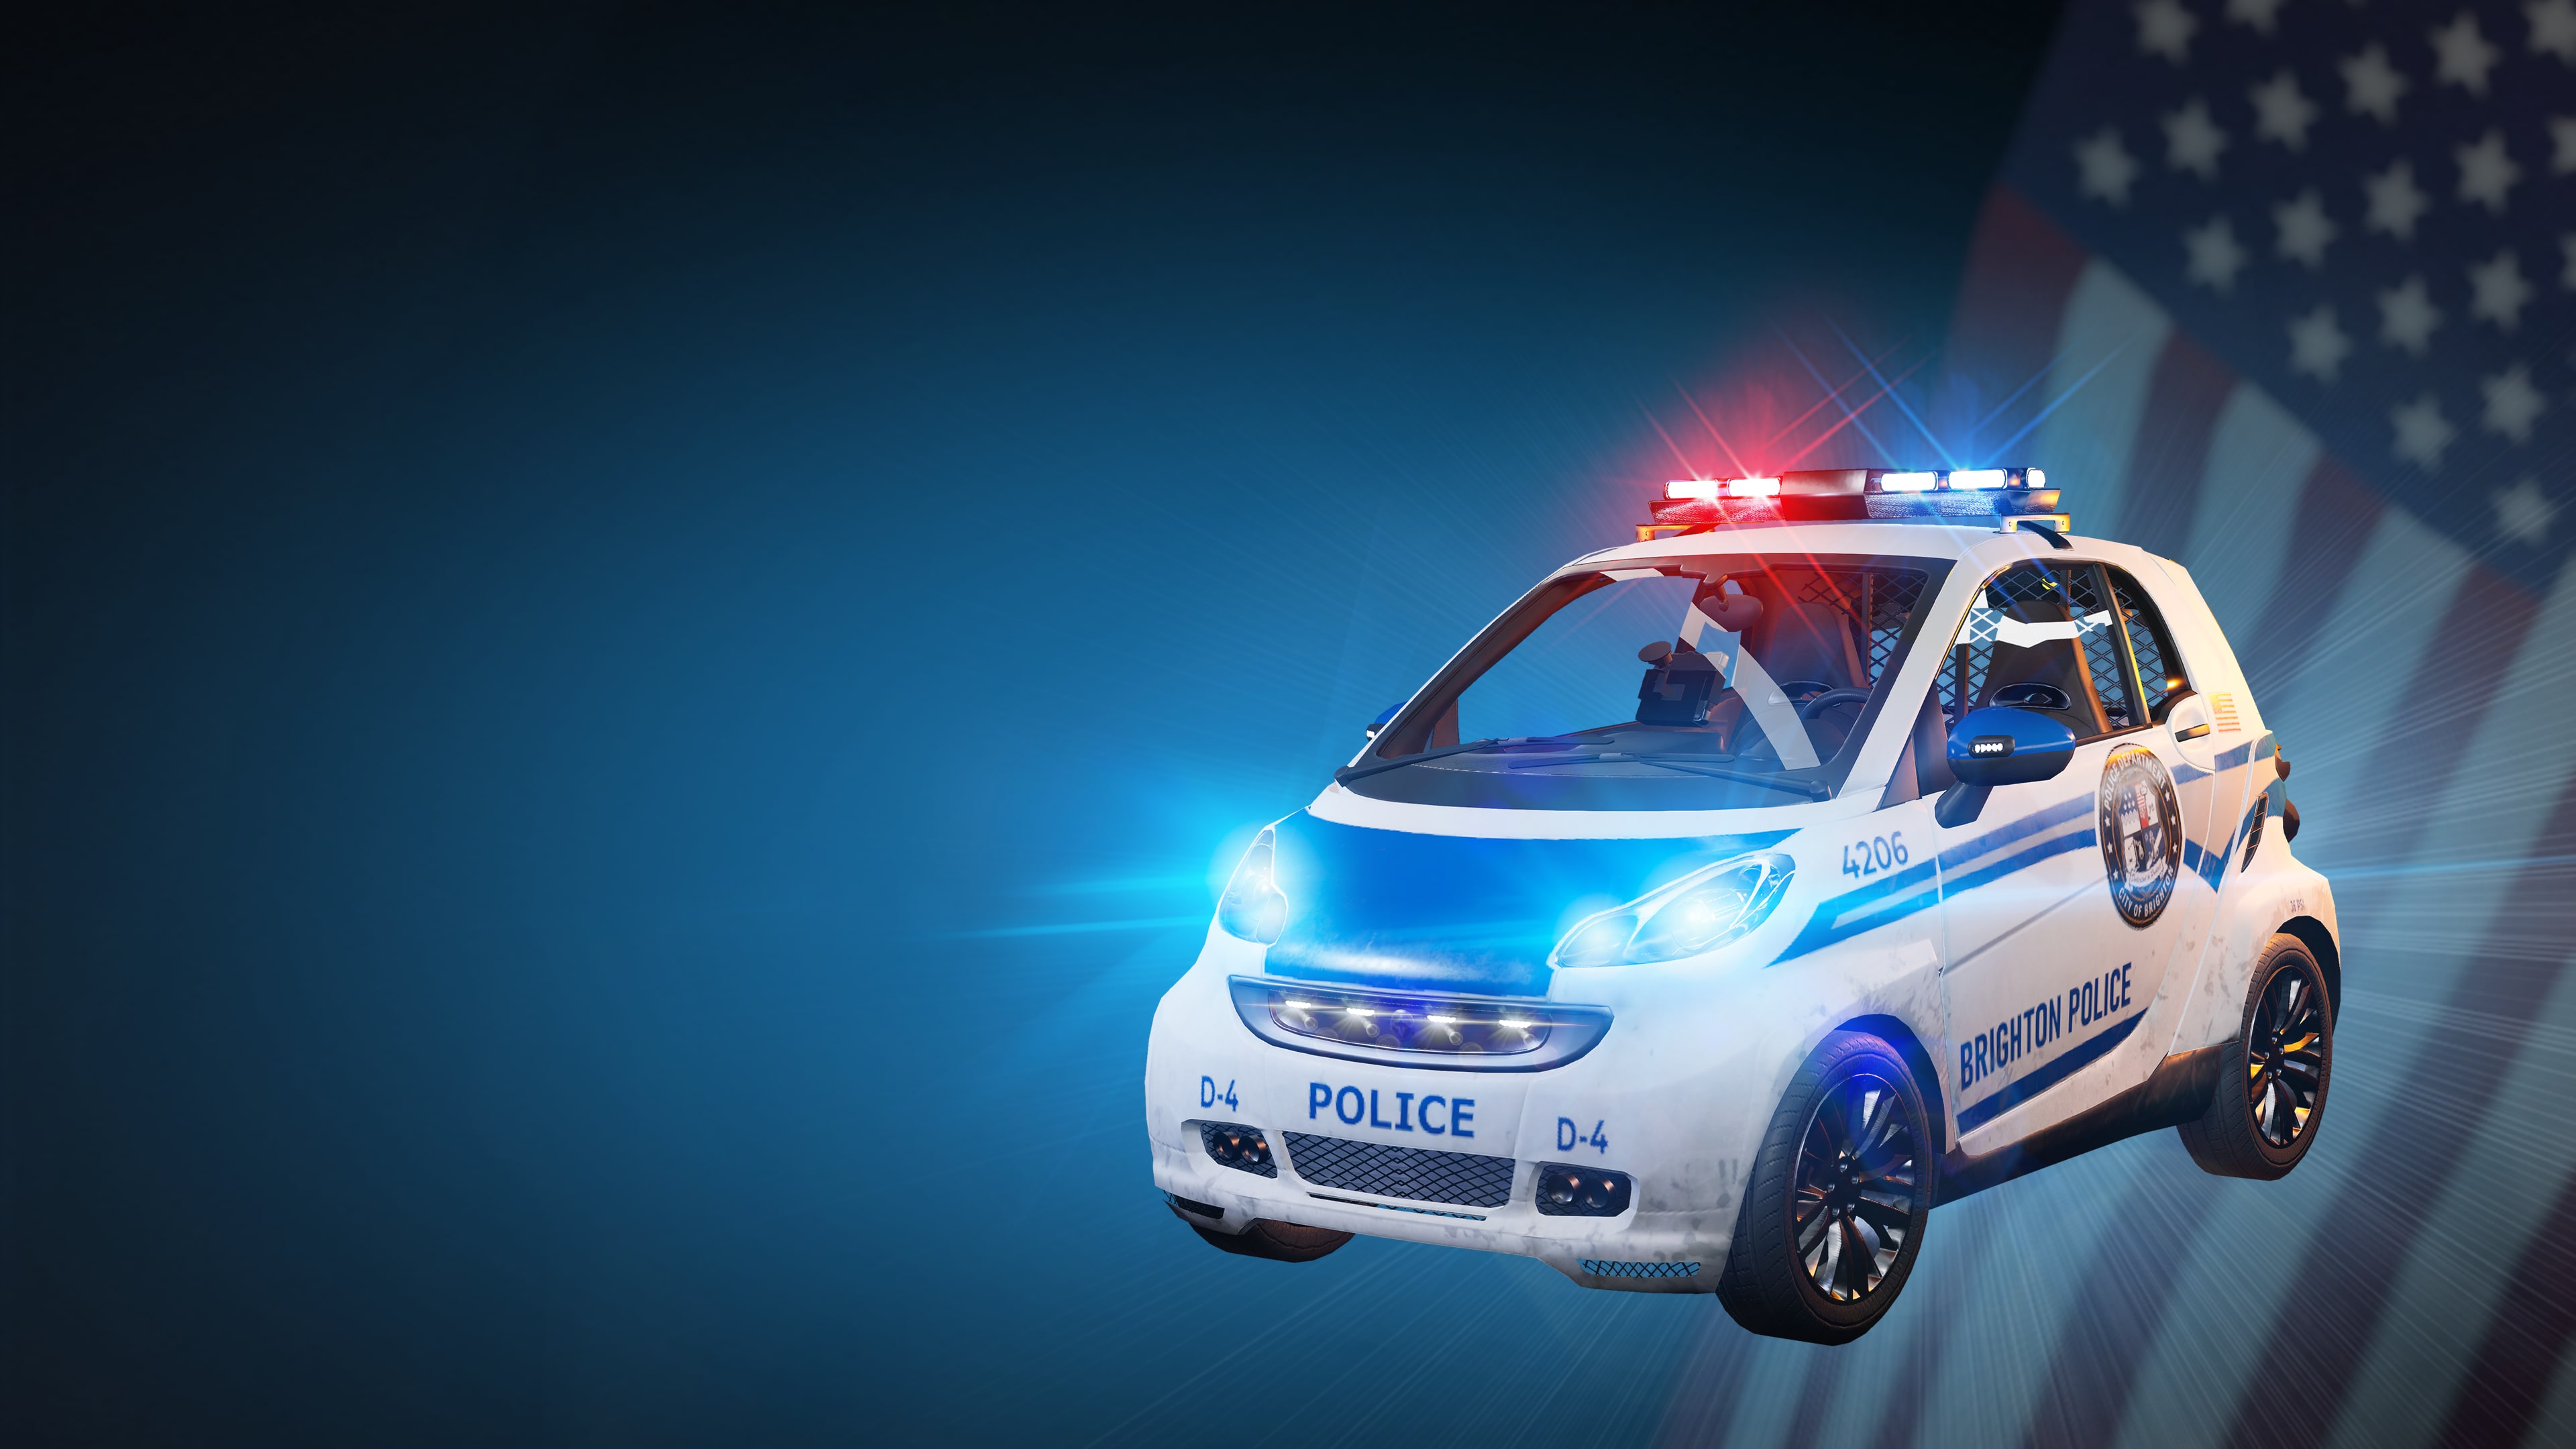 DLC Vehicle Compact : Patrol Simulator: Officers Police Police